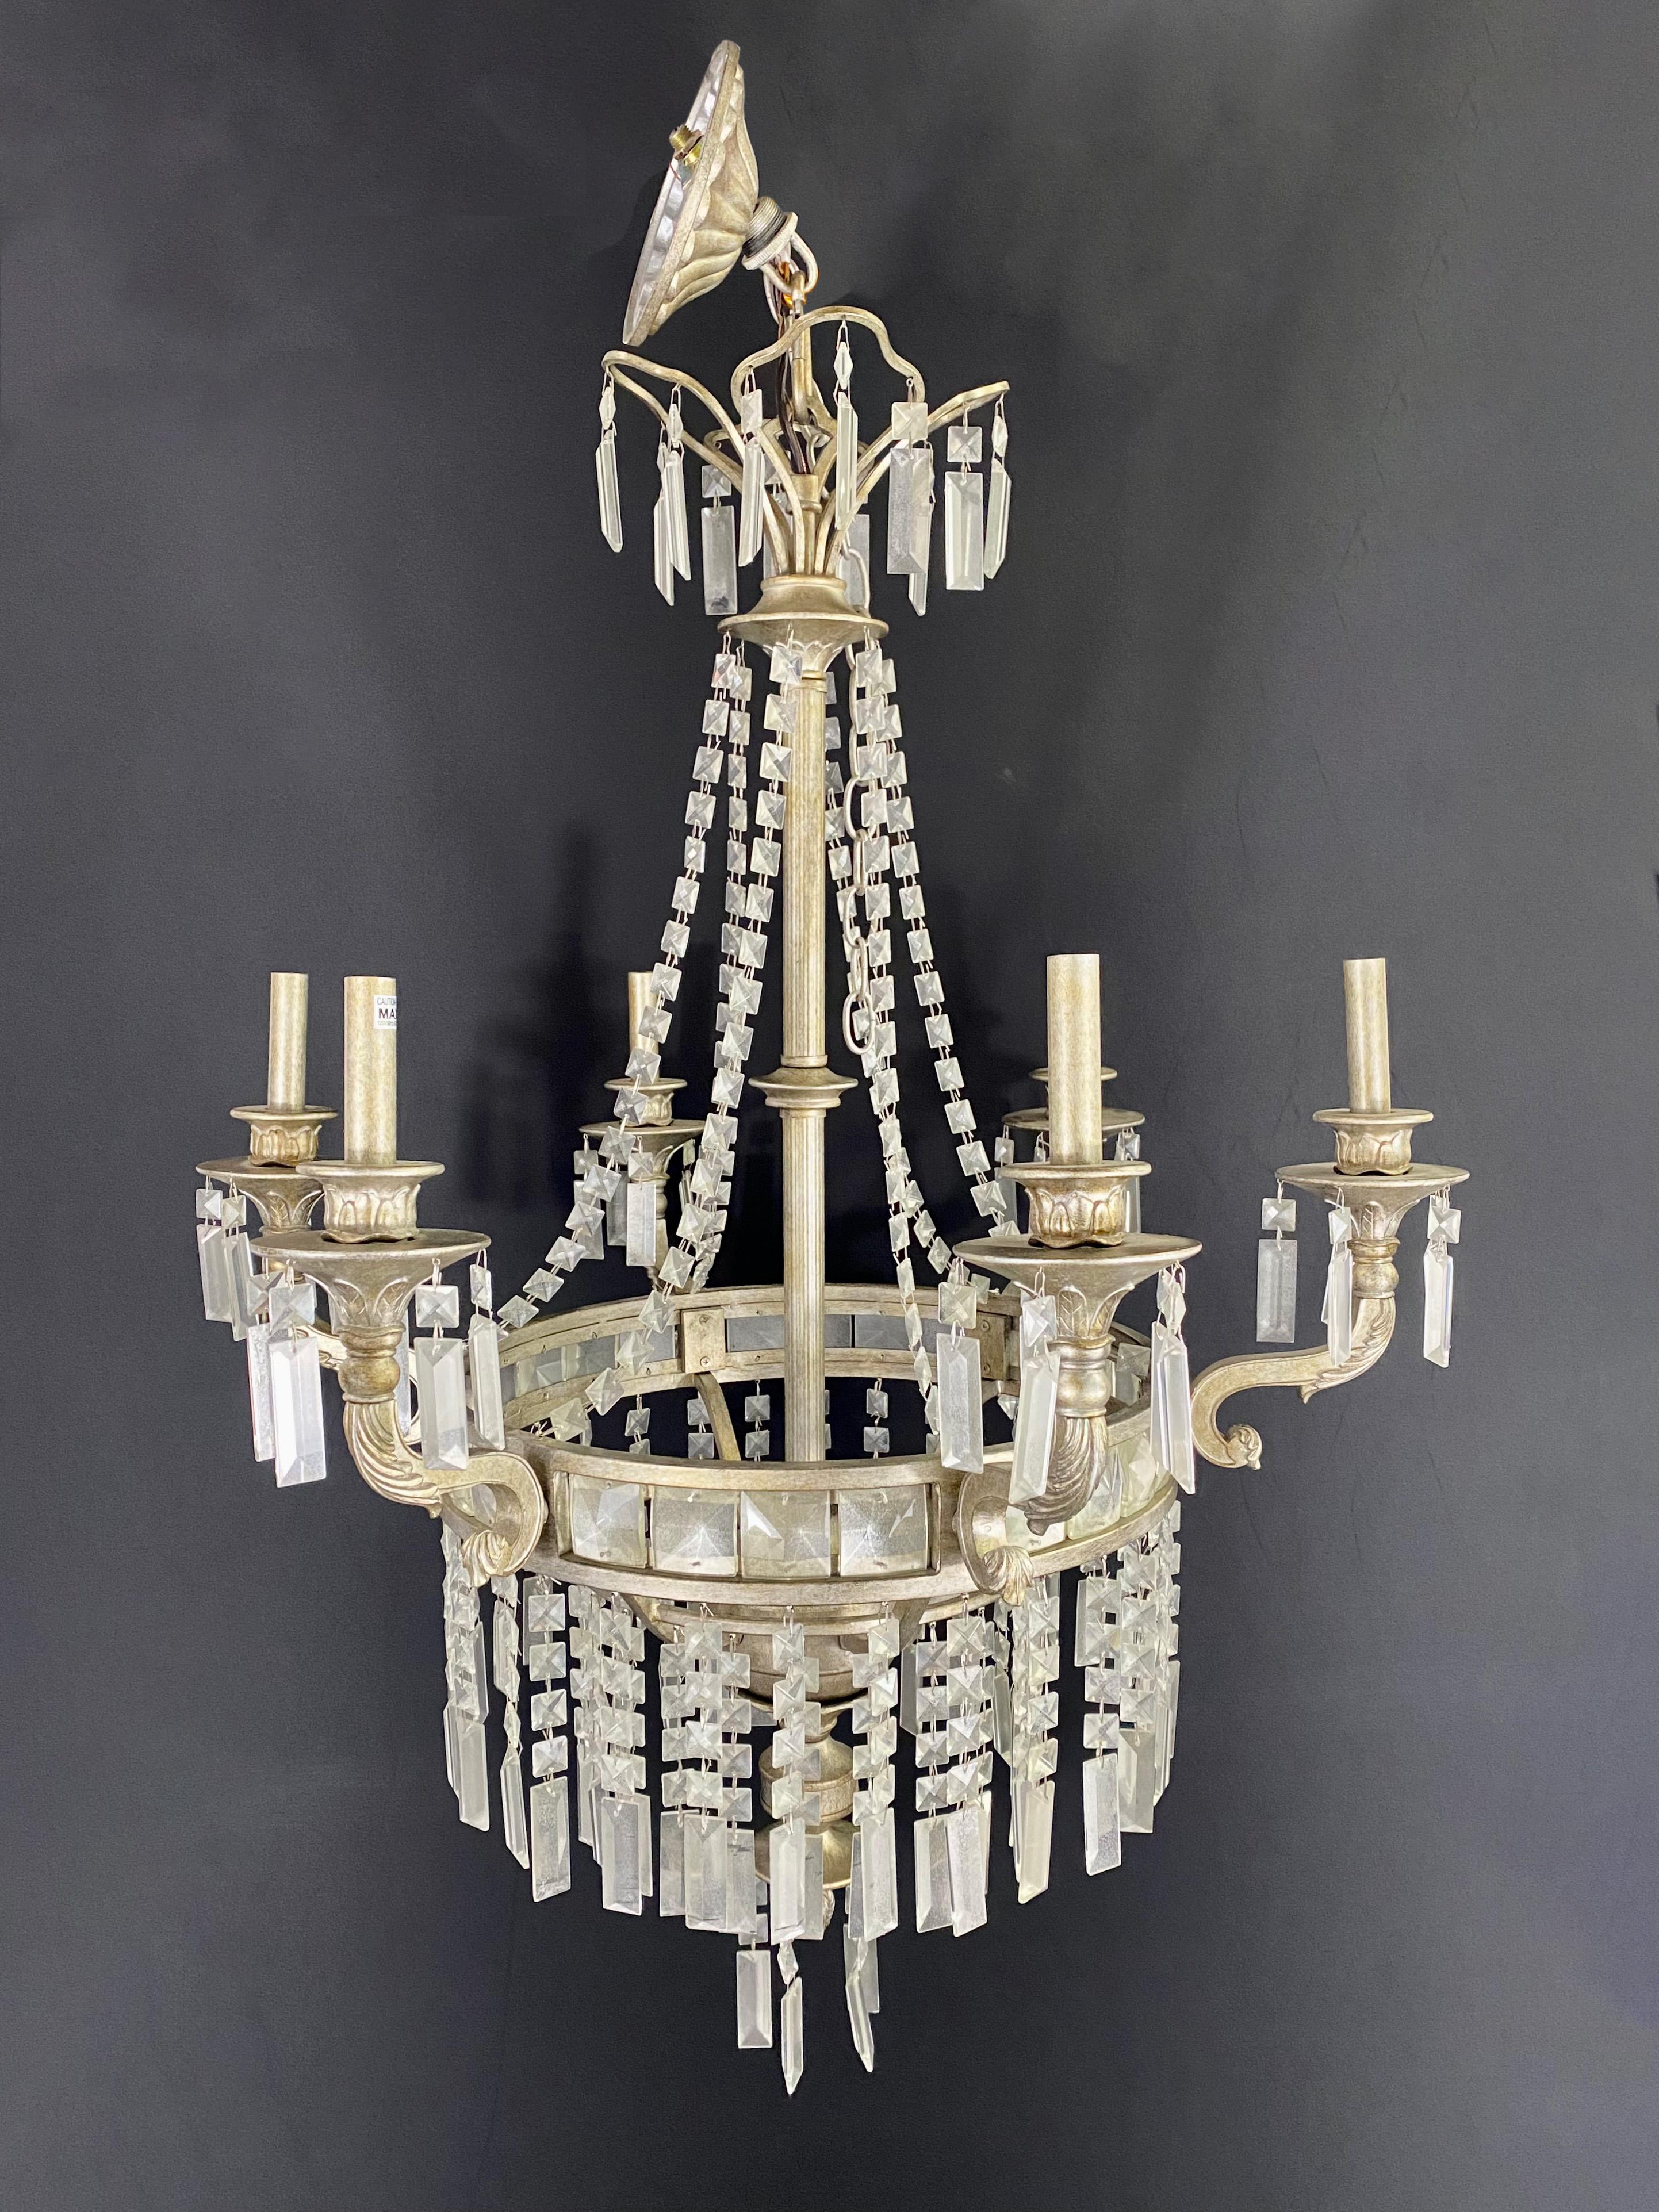 A stylish French federal style chandelier made in antiqued fashion. The metal frame has a beautiful pewter antique finish. The chandelier is embellished with triangle lucite prisms also having a white antiqued finish. The chandelier hosts 6